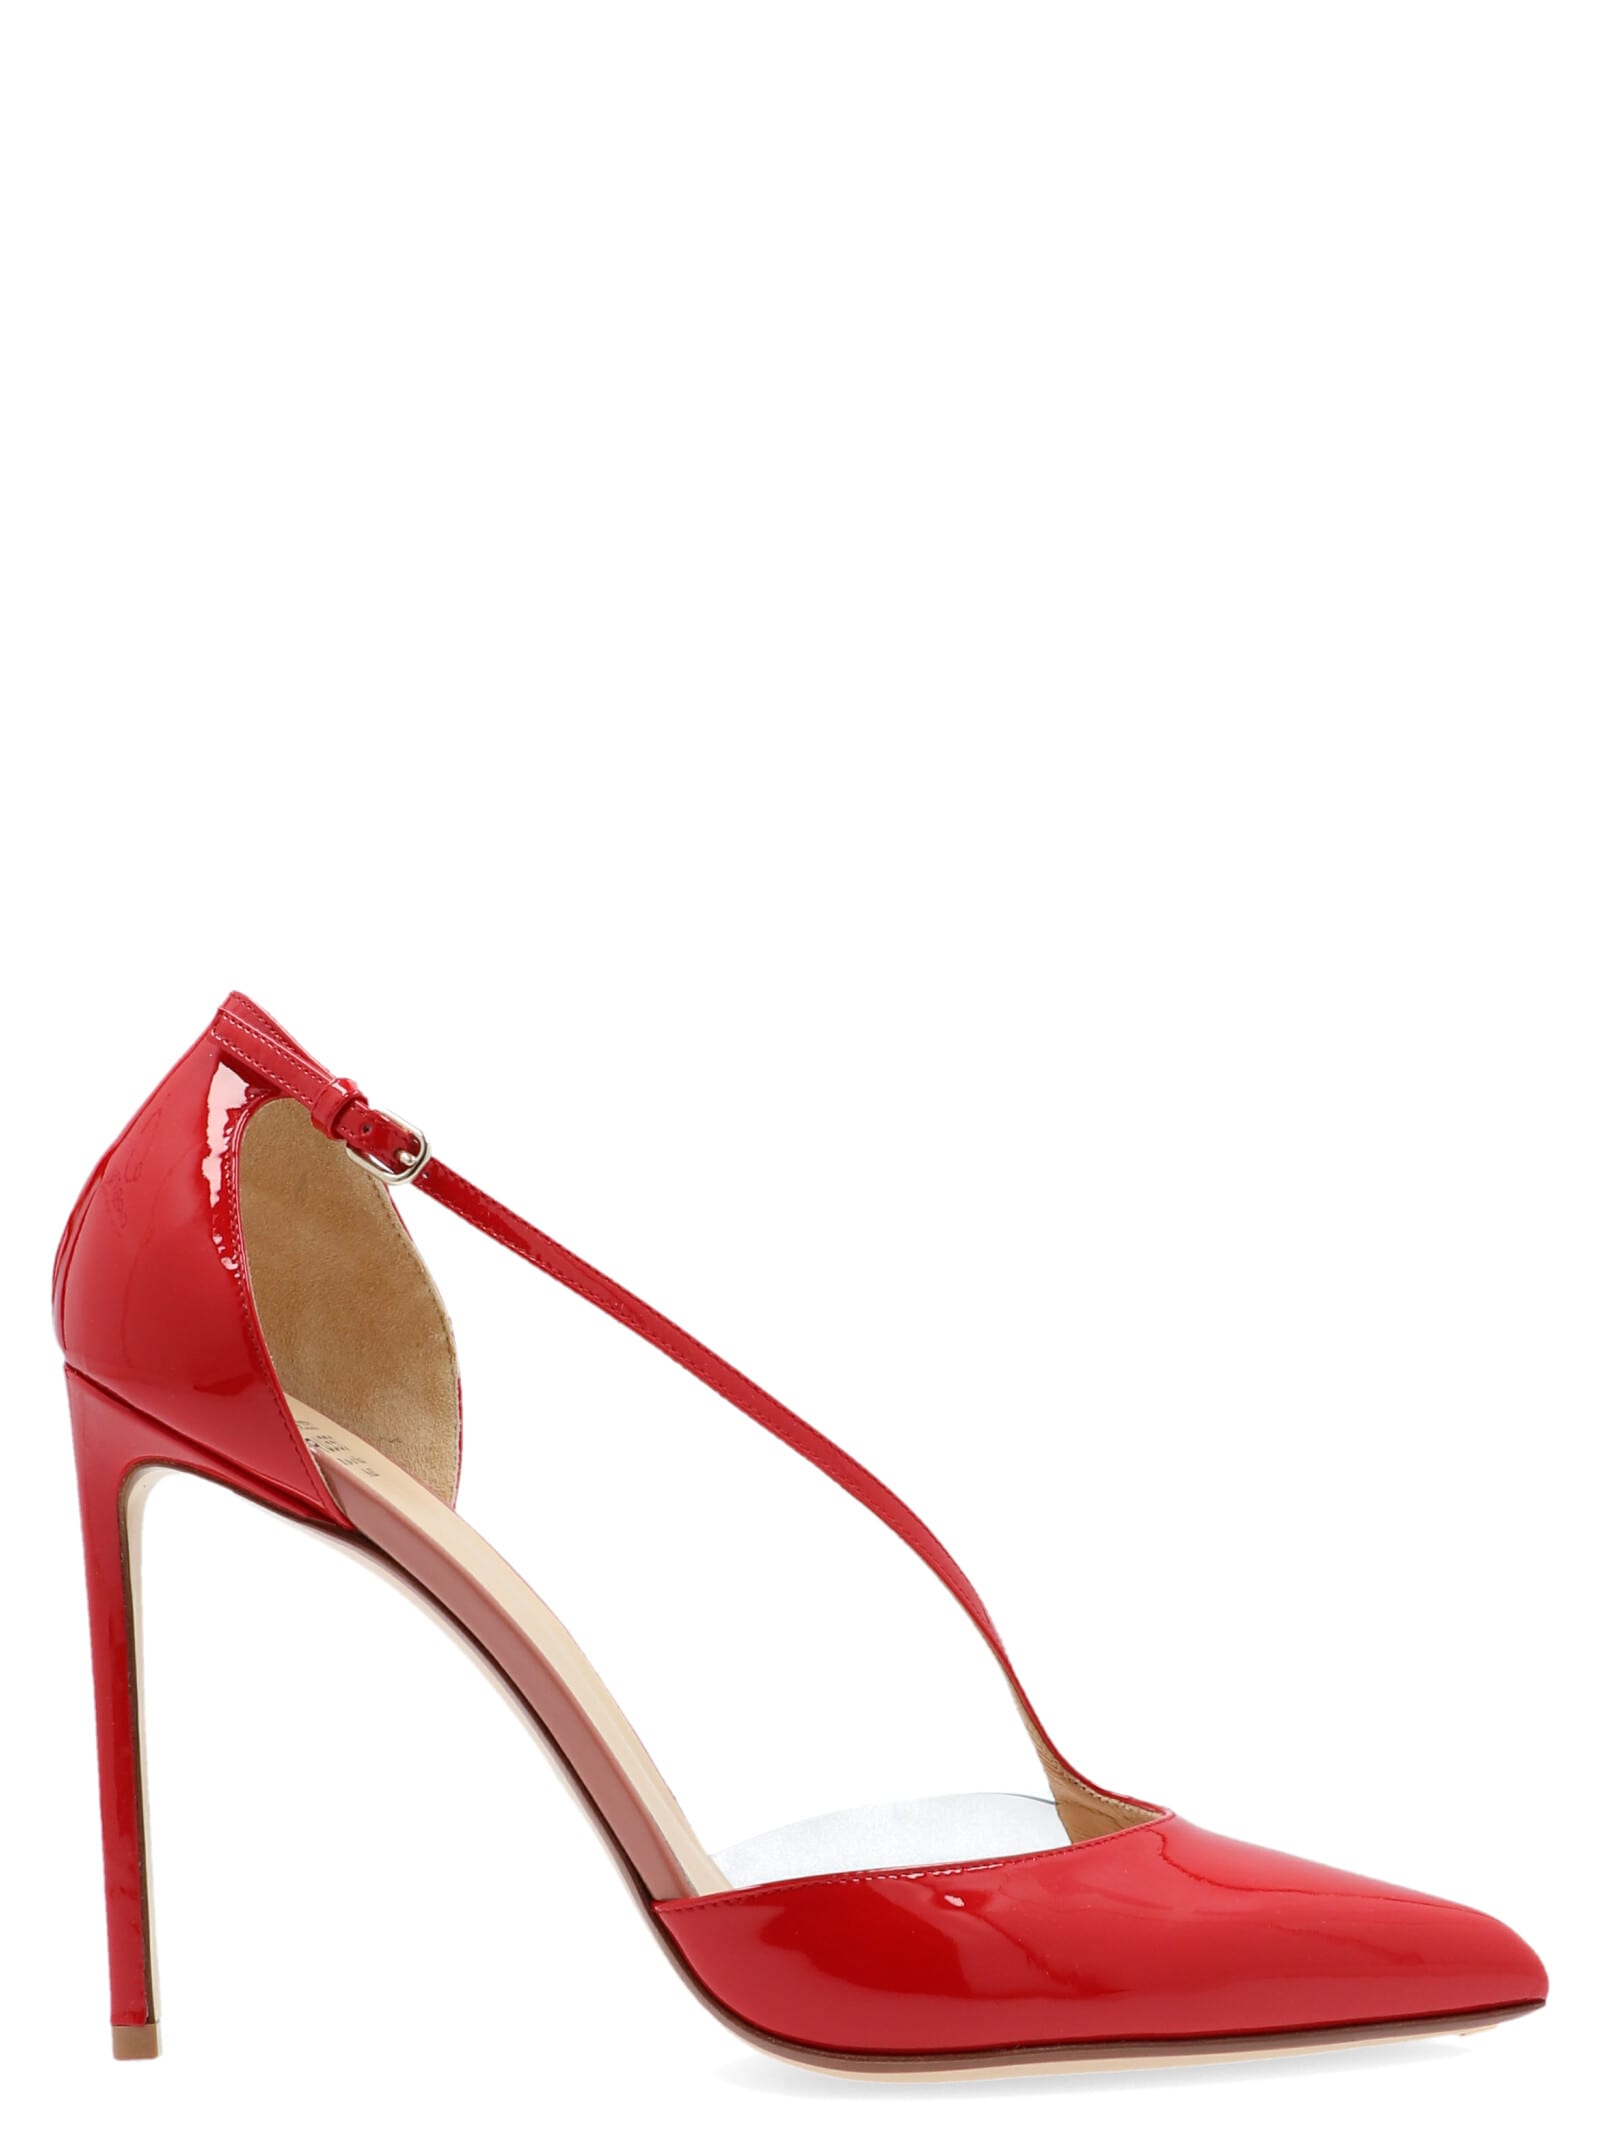 Buy Francesco Russo Shoes online, shop Francesco Russo shoes with free shipping